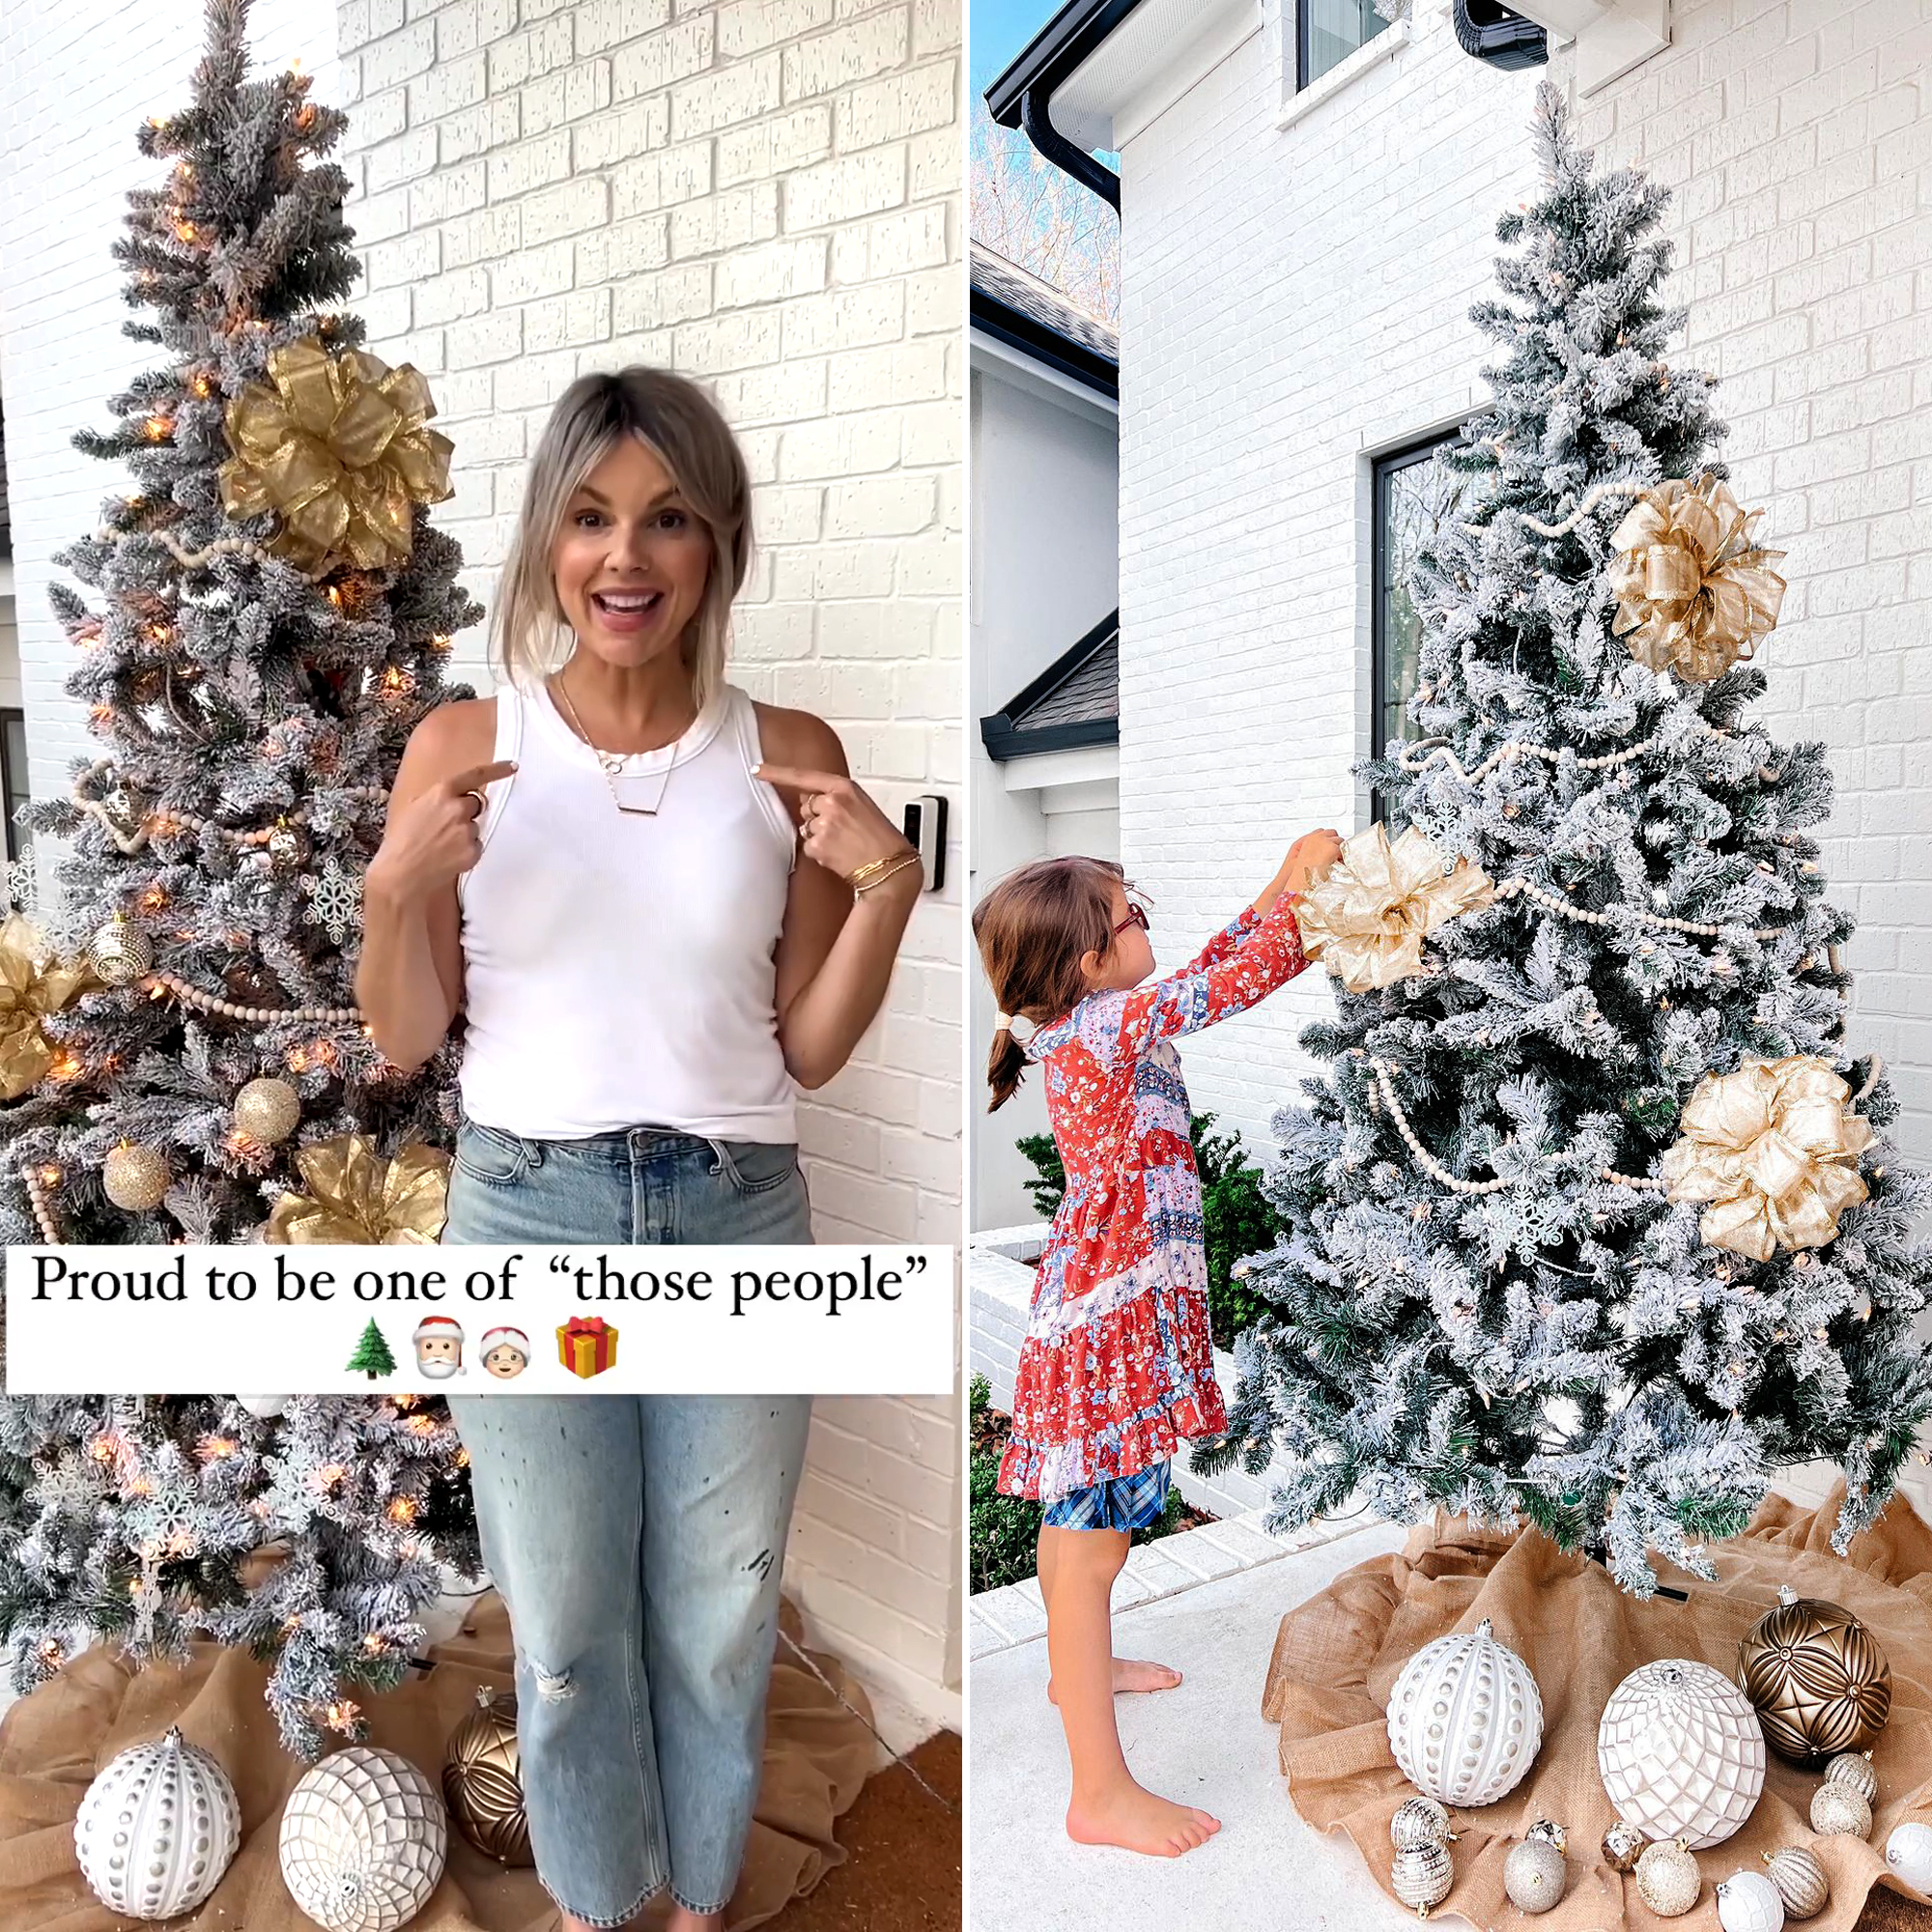 Celebrities Decorating Their Homes for 2022 Holidays